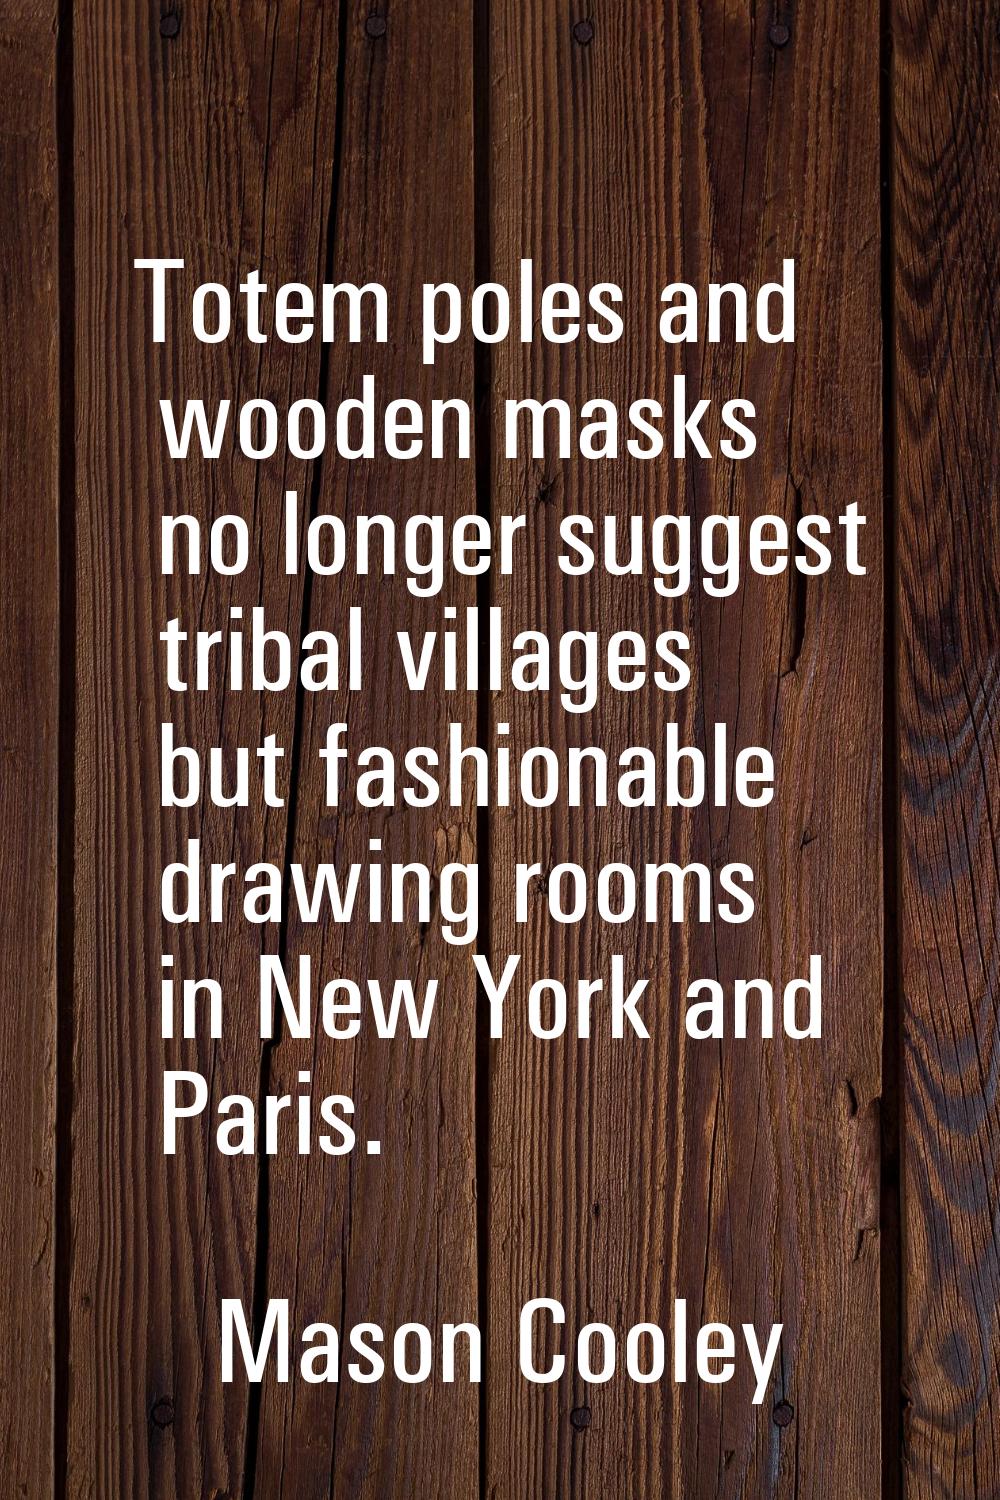 Totem poles and wooden masks no longer suggest tribal villages but fashionable drawing rooms in New